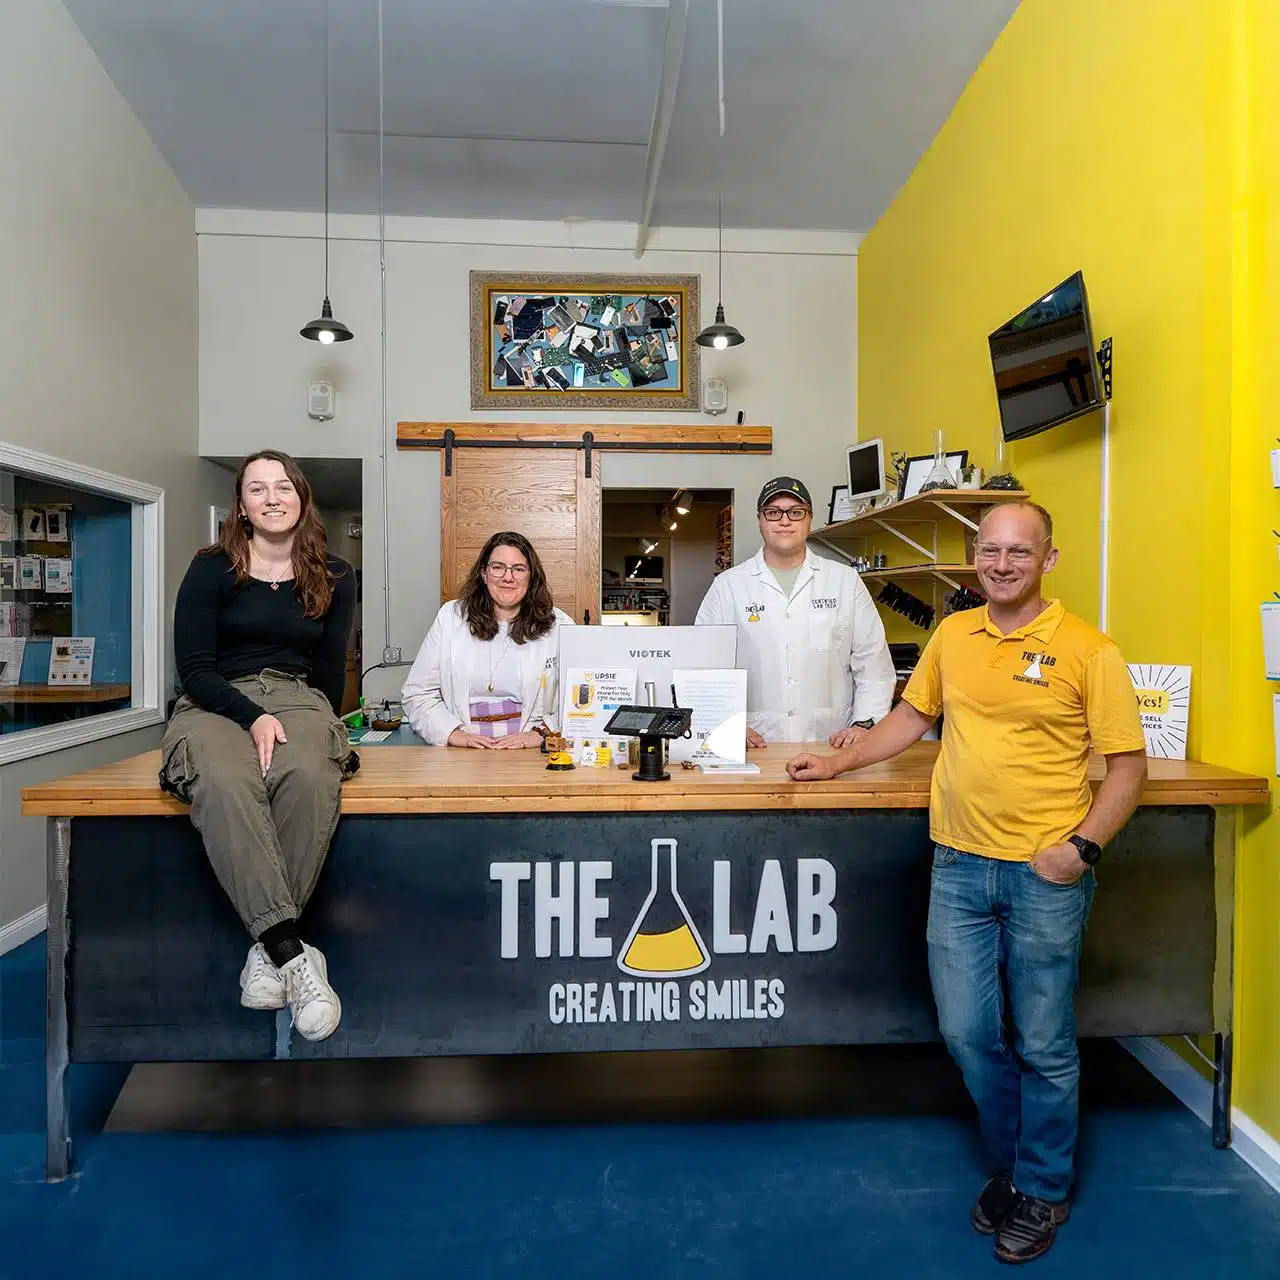 The Lab staff members standing behind the front desk counter inside The Lab